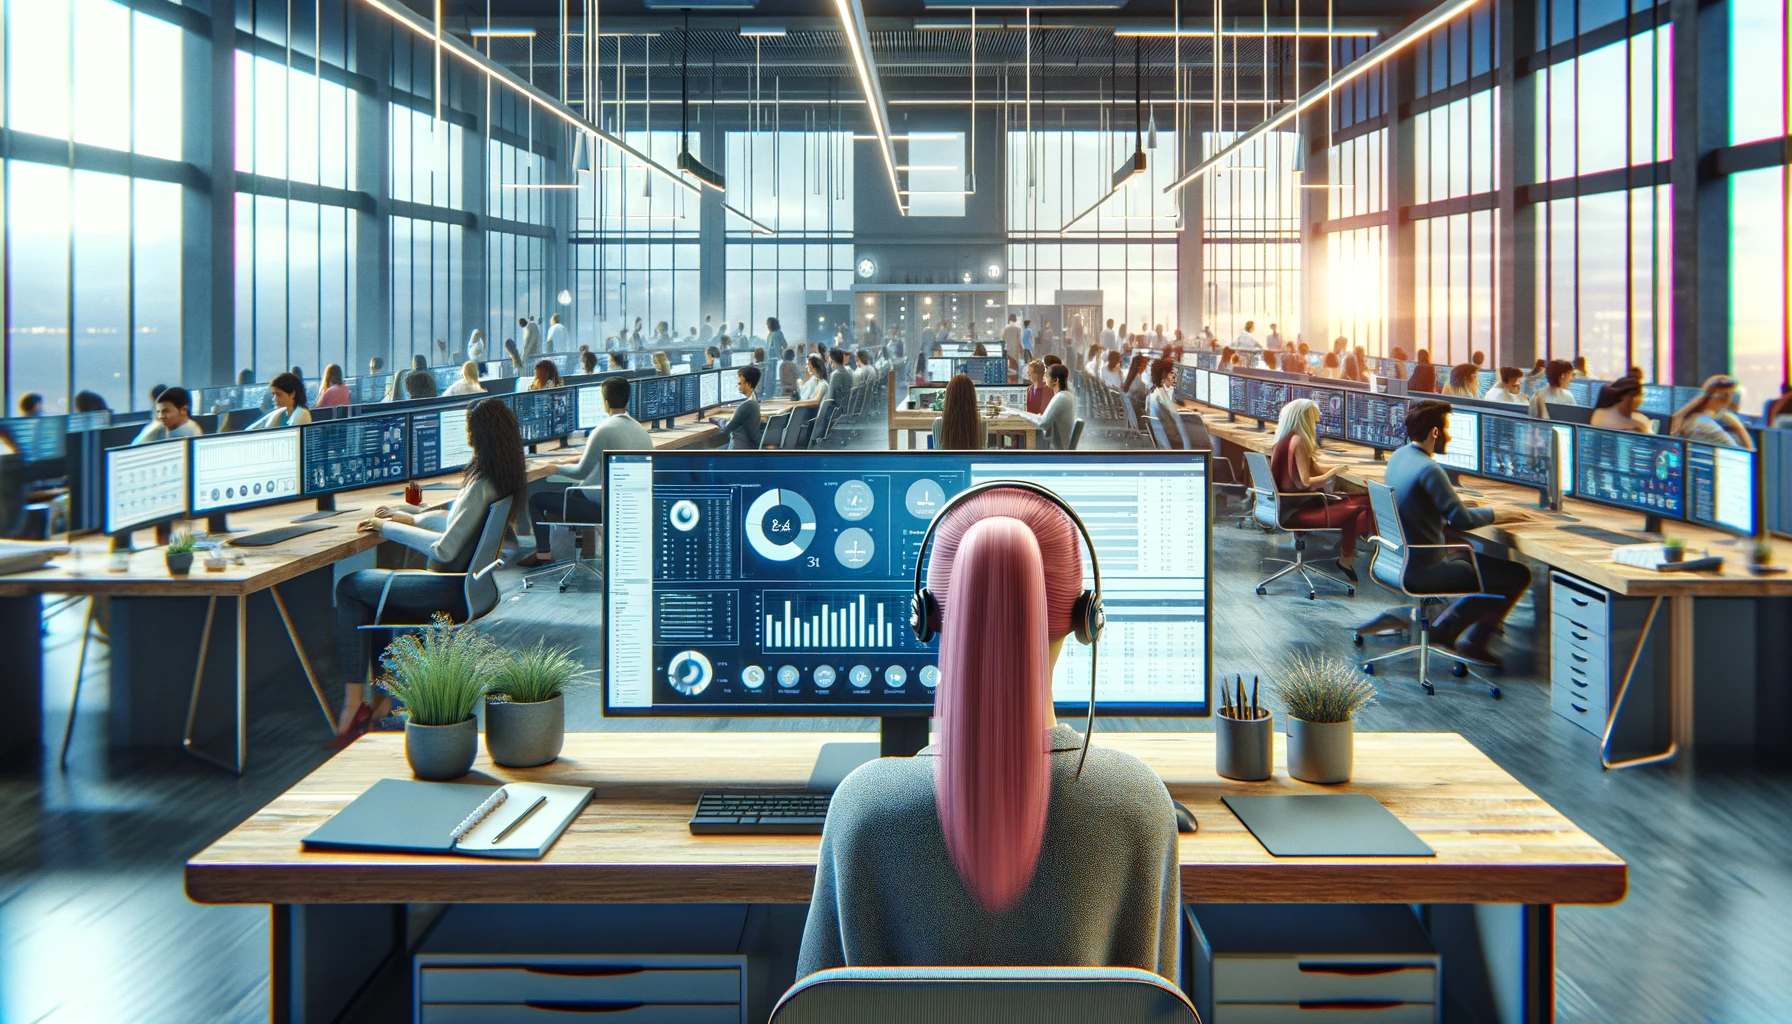 A wide aspect ratio concept art of a bustling contact center in a modern, open concept office. The scene features a woman with pink hair sitting at a desk working with a conversational intelligence platform